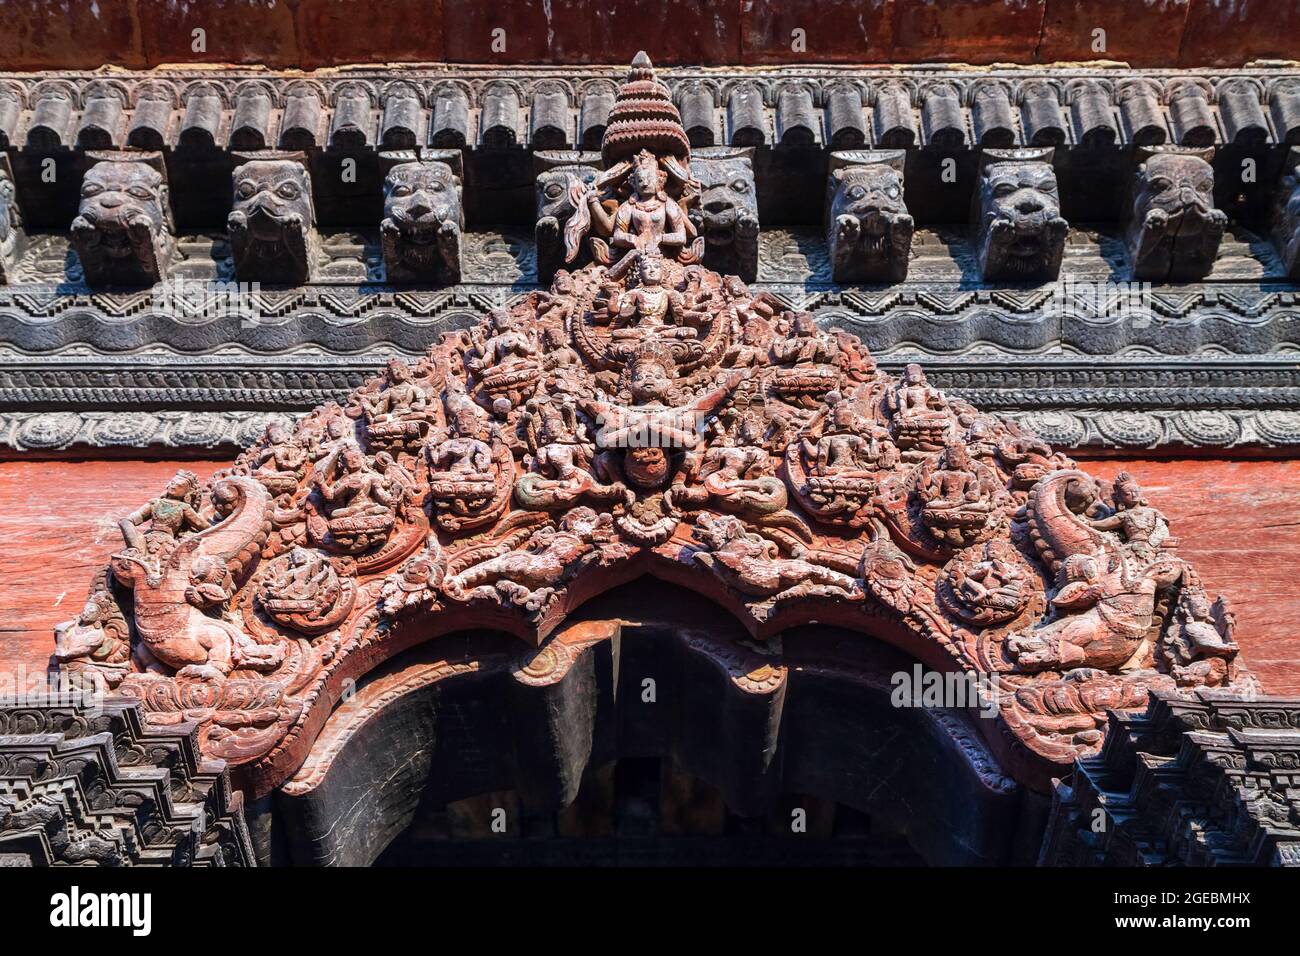 Relief carving on a hindu temple at the Patan Durbar Square in Lalitpur or historically Patan city near in Kathmandu in Nepal Stock Photo